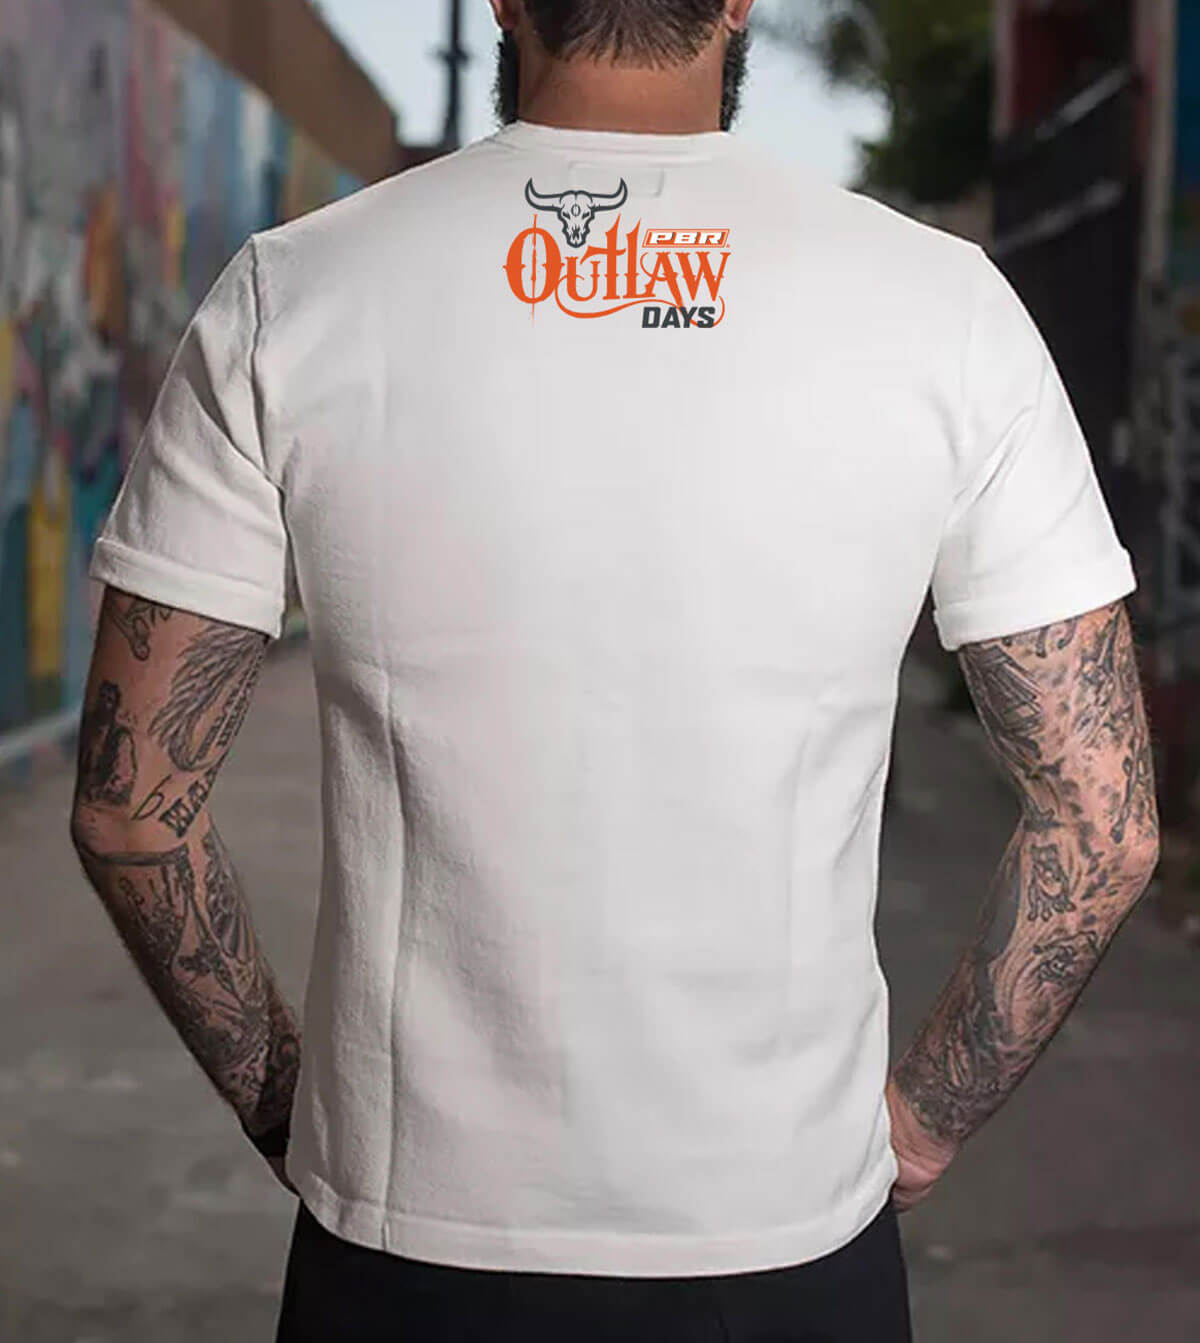 Back view of "Outlaws and Beer" t-shirt.